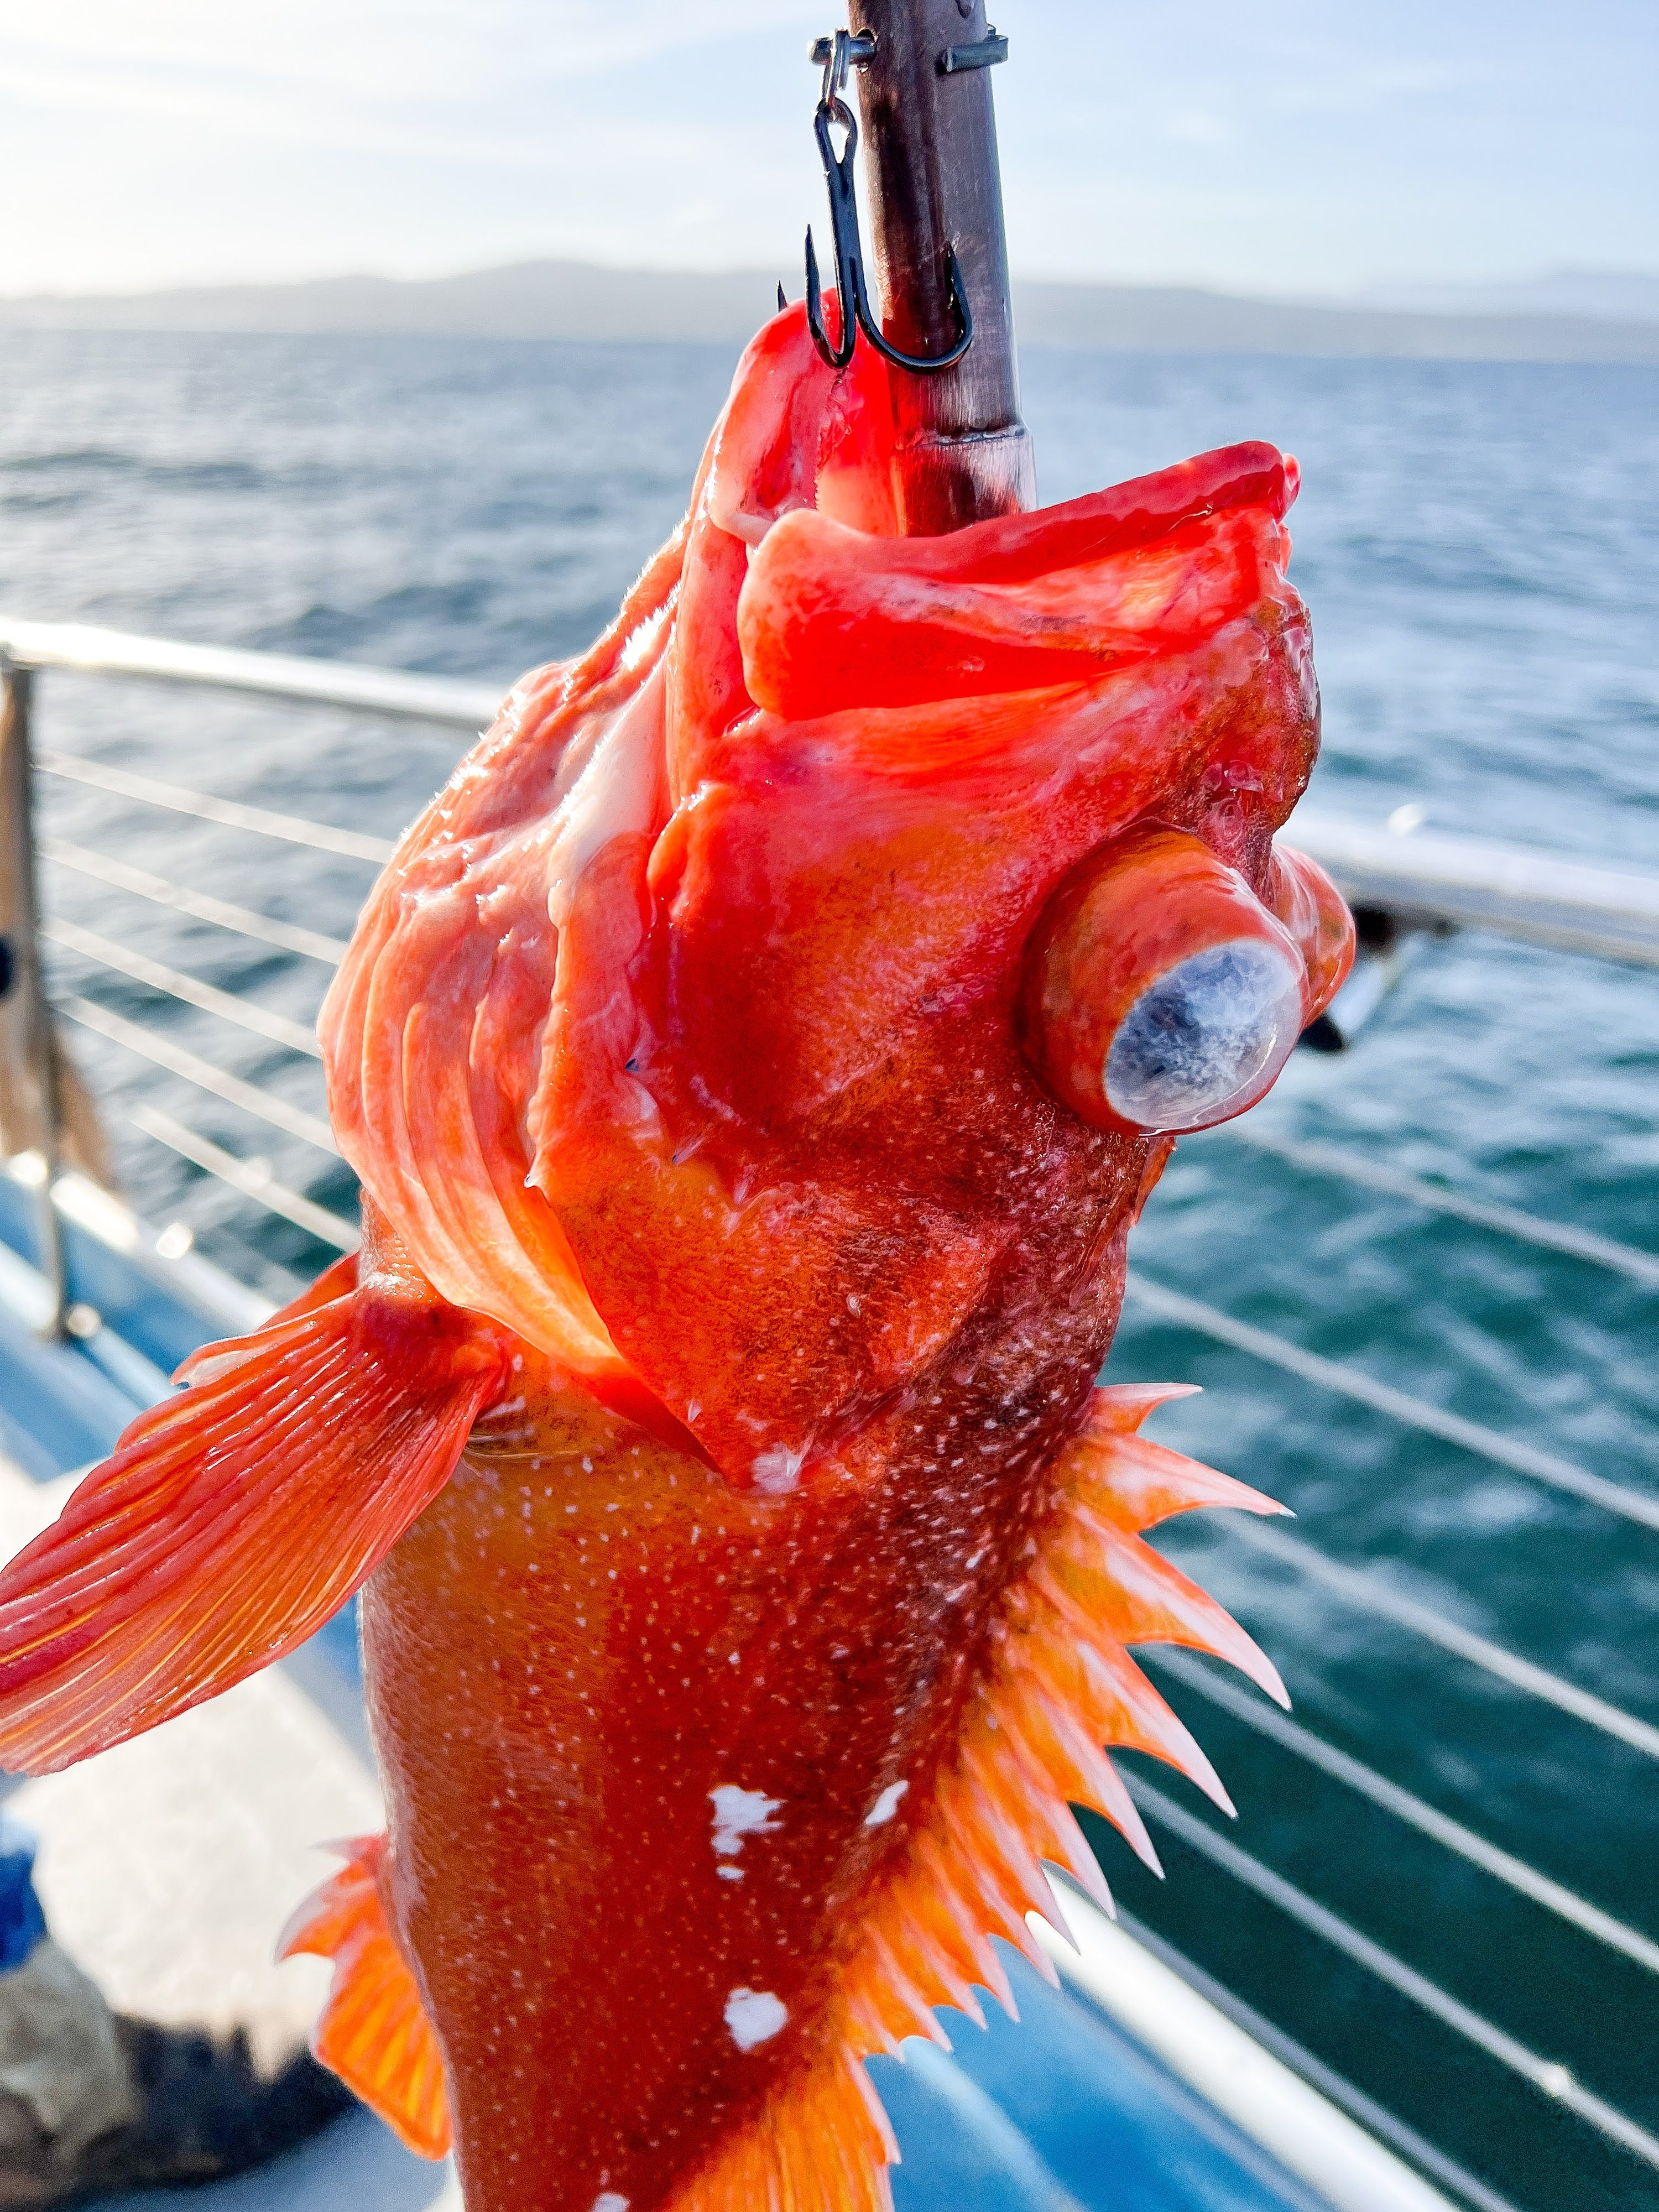 Copper pipe jig catching an orange starry rockfish